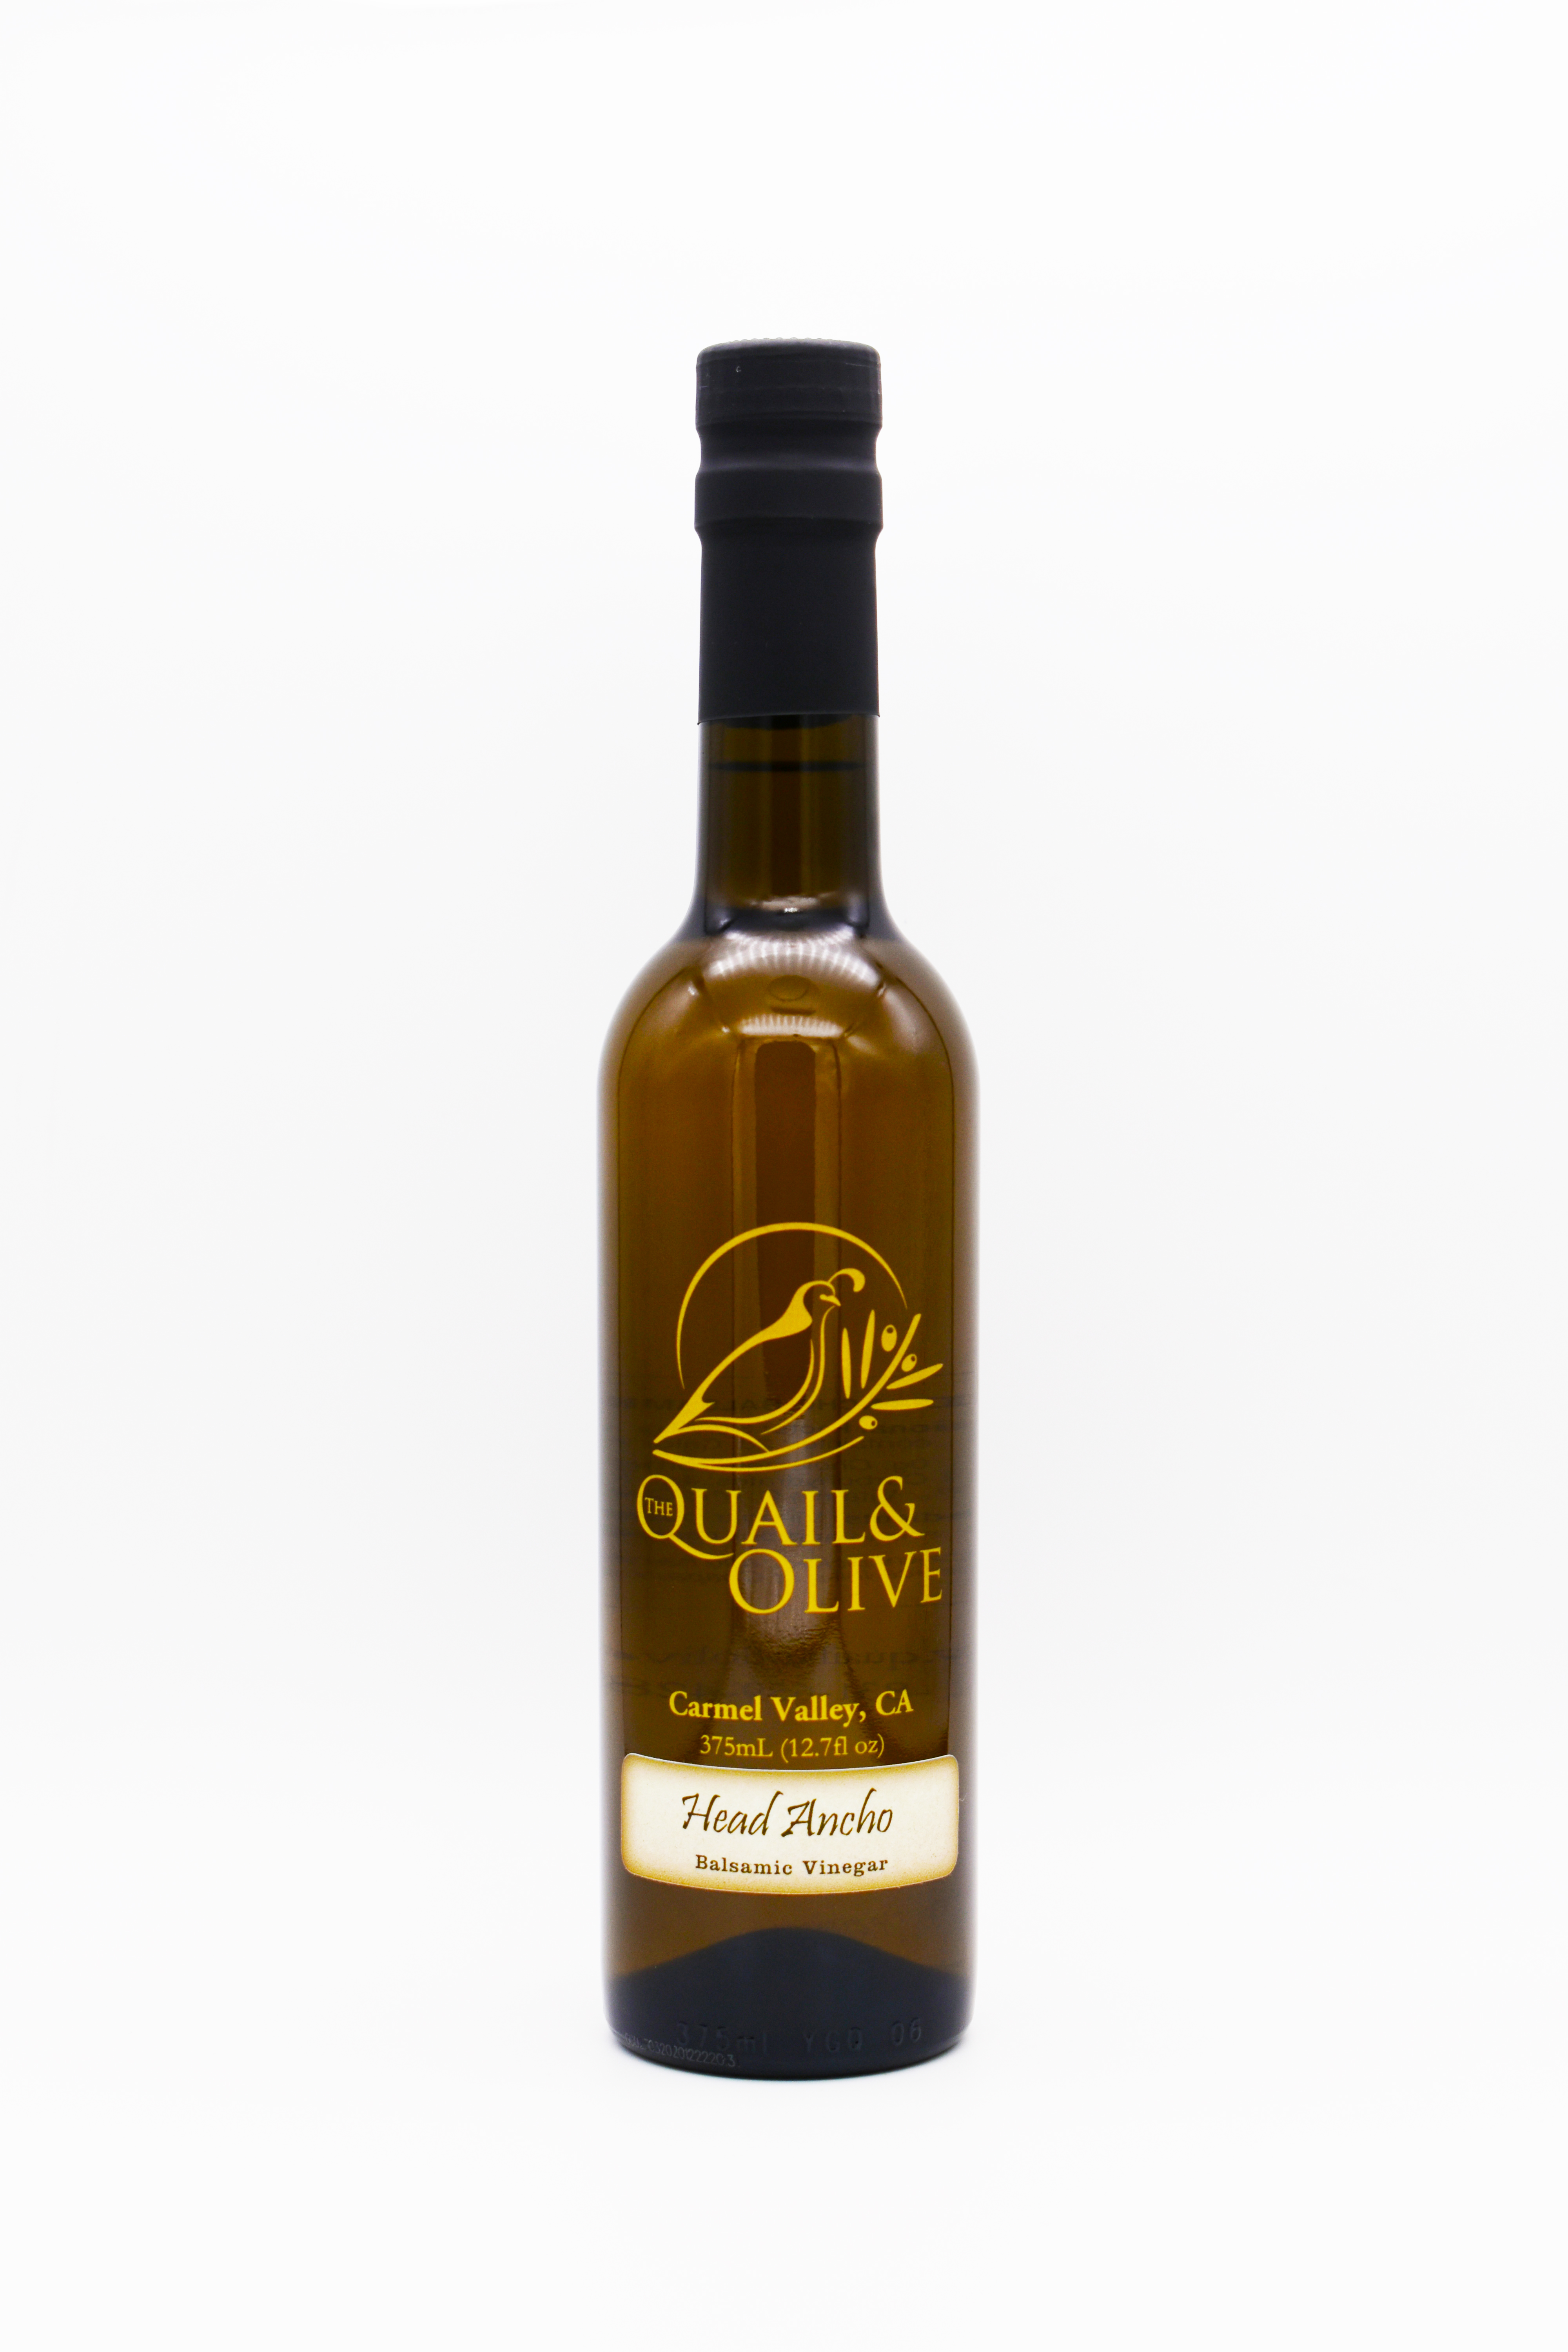 Product Image for Head Ancho Balsamic Vinegar